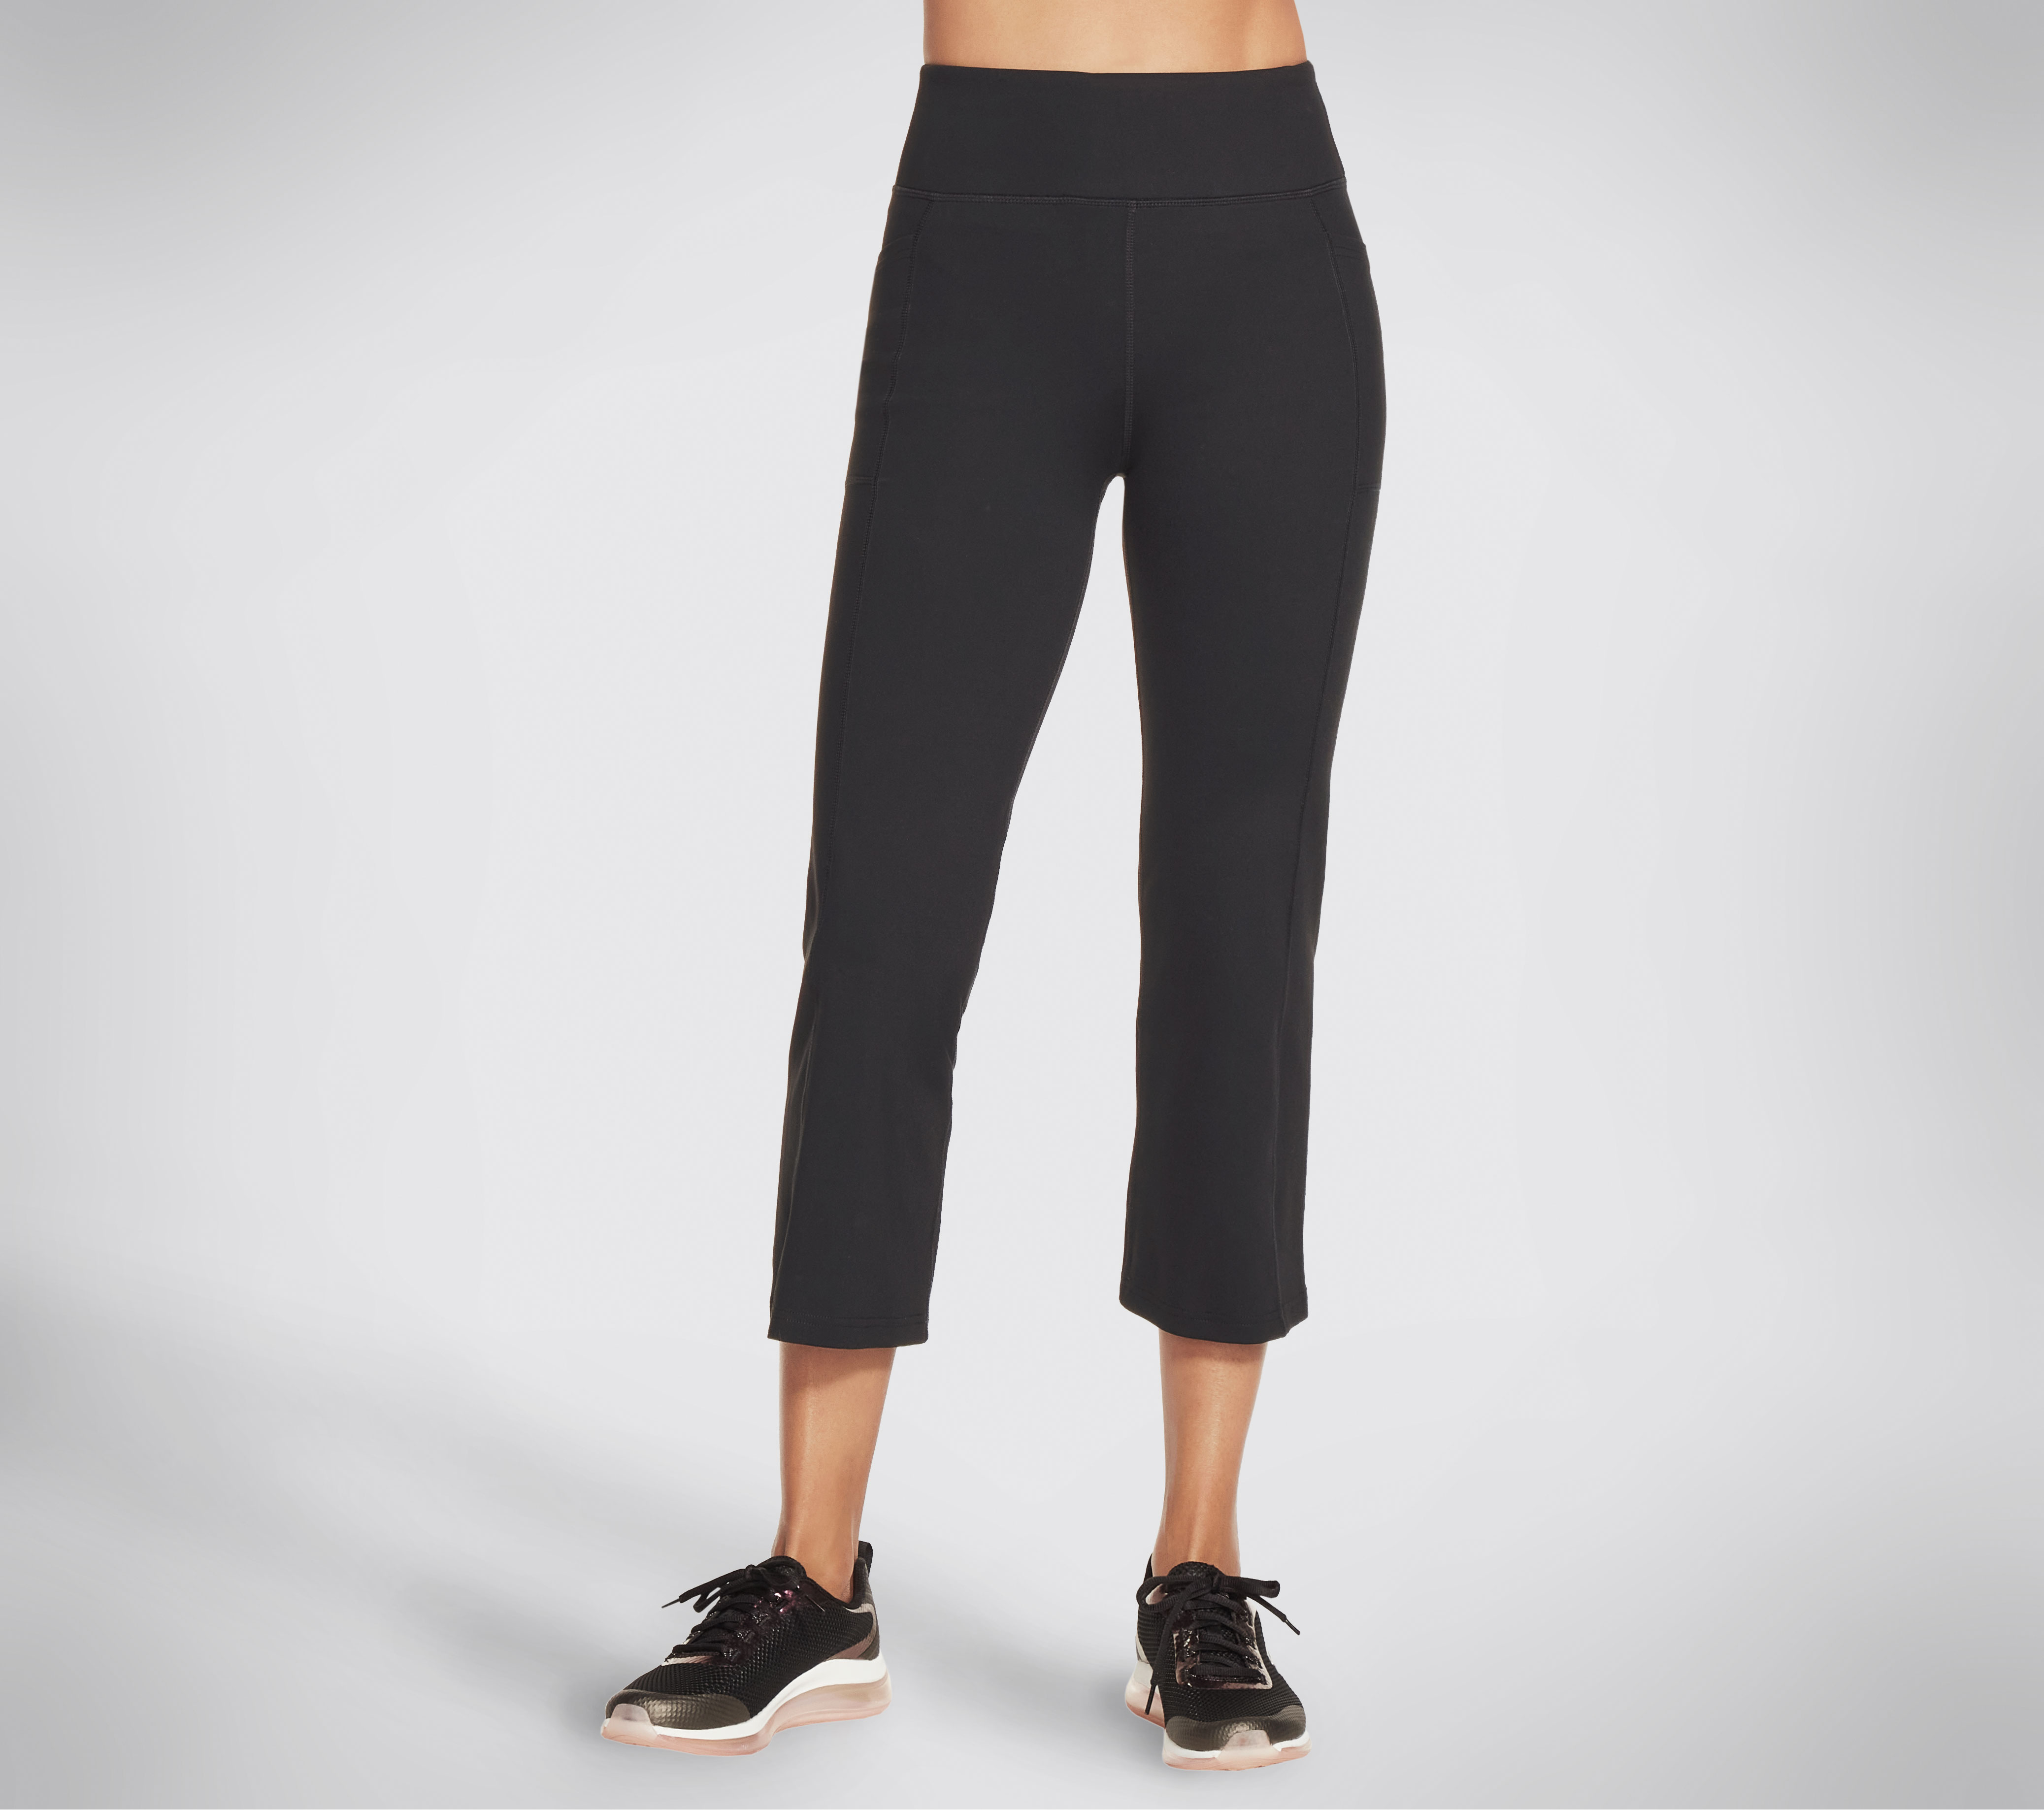 Cropped Pants Women Clothing One Step Women Shorts & Cropped Pants One Step Women Cropped Pants brown Capri Pants One Step Women S, T1 Capri Pants ONE STEP 36 Capri Pants One Step Women Cropped Pants 